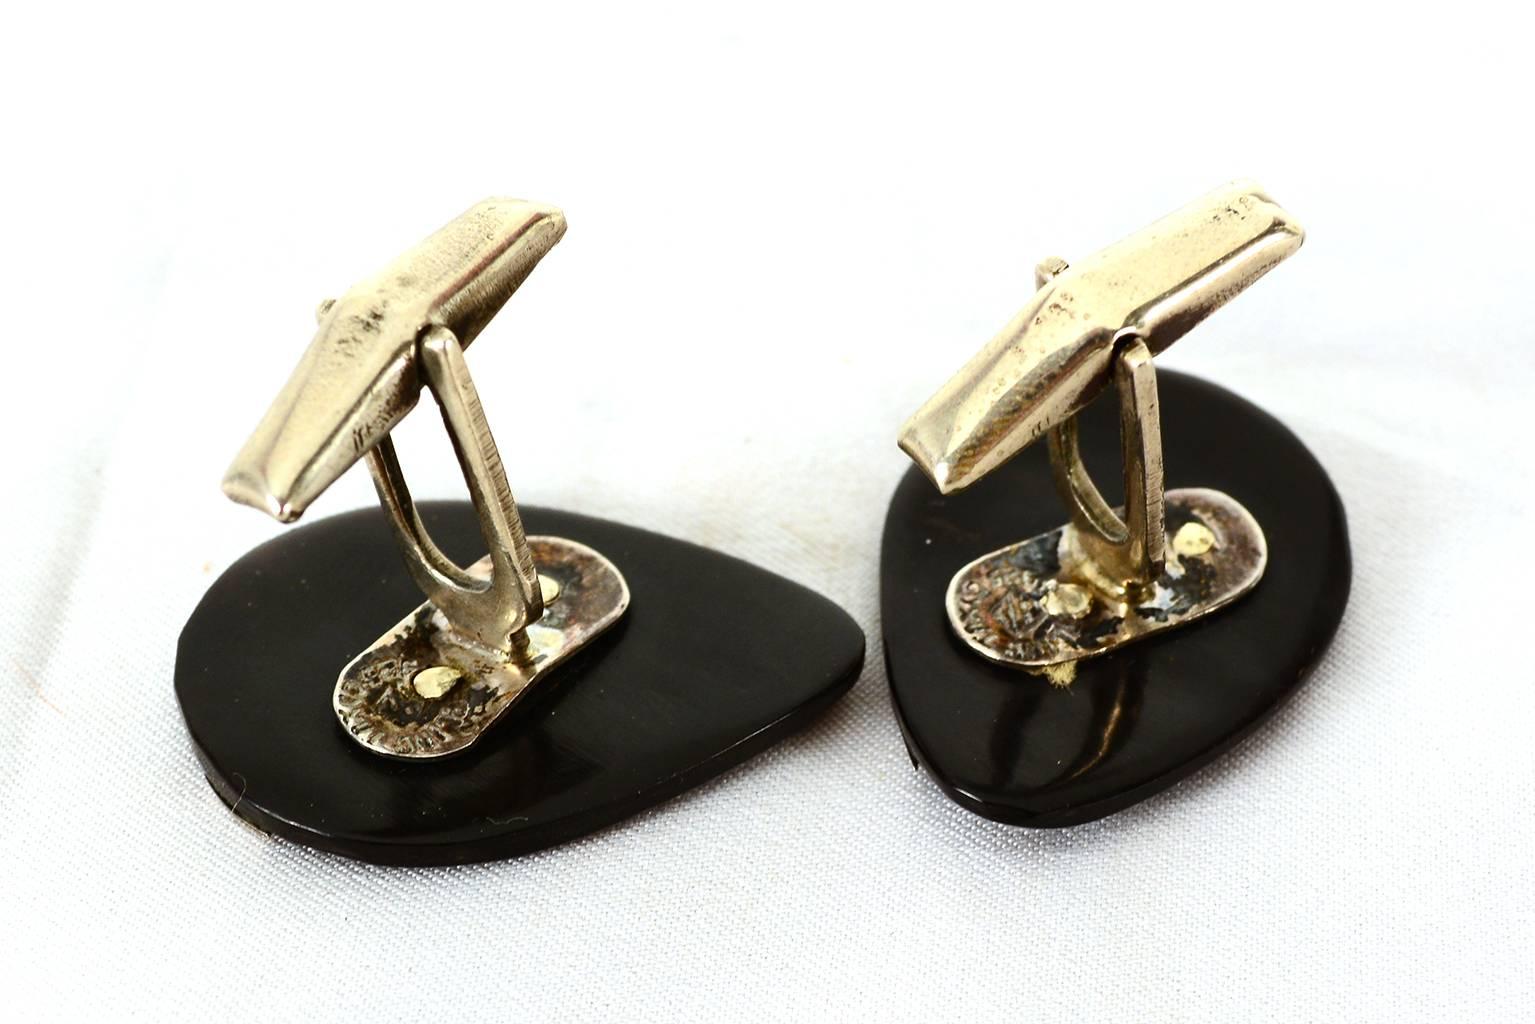 Mid-Century Modern Mexican Modernist Cufflinks Silver and Onyx Taxco Sterling